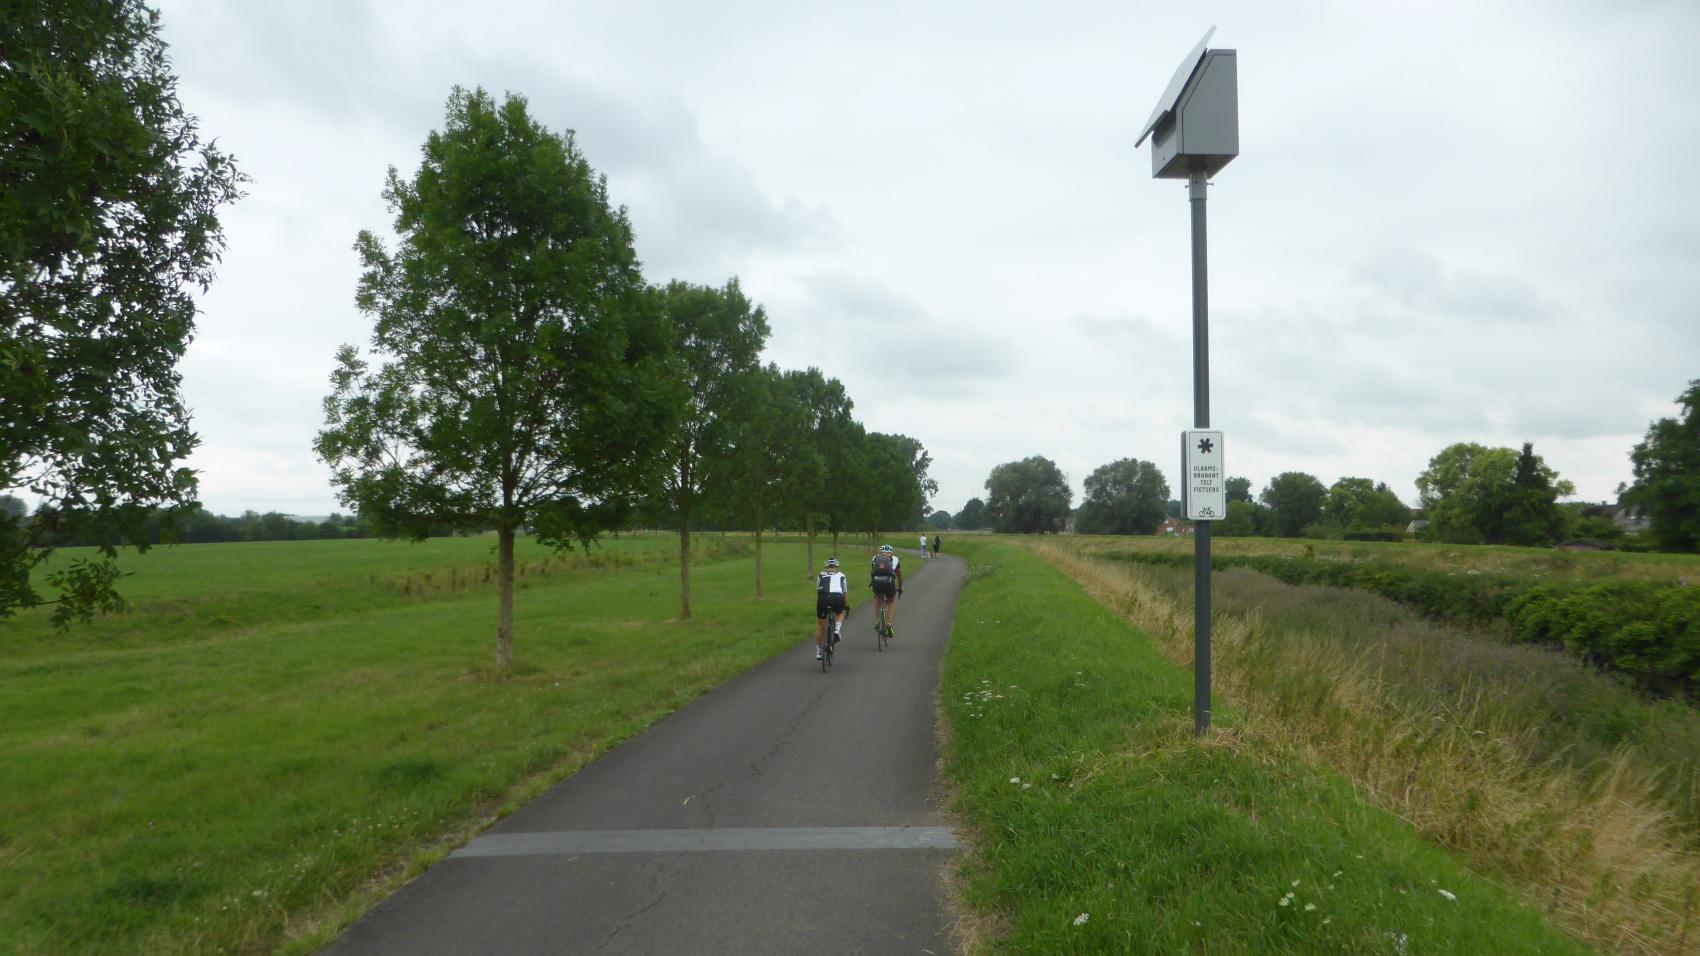 In Eppegem the new cycle path connects to an existing asphalt path continuing along Zenne to Vilvoorde.